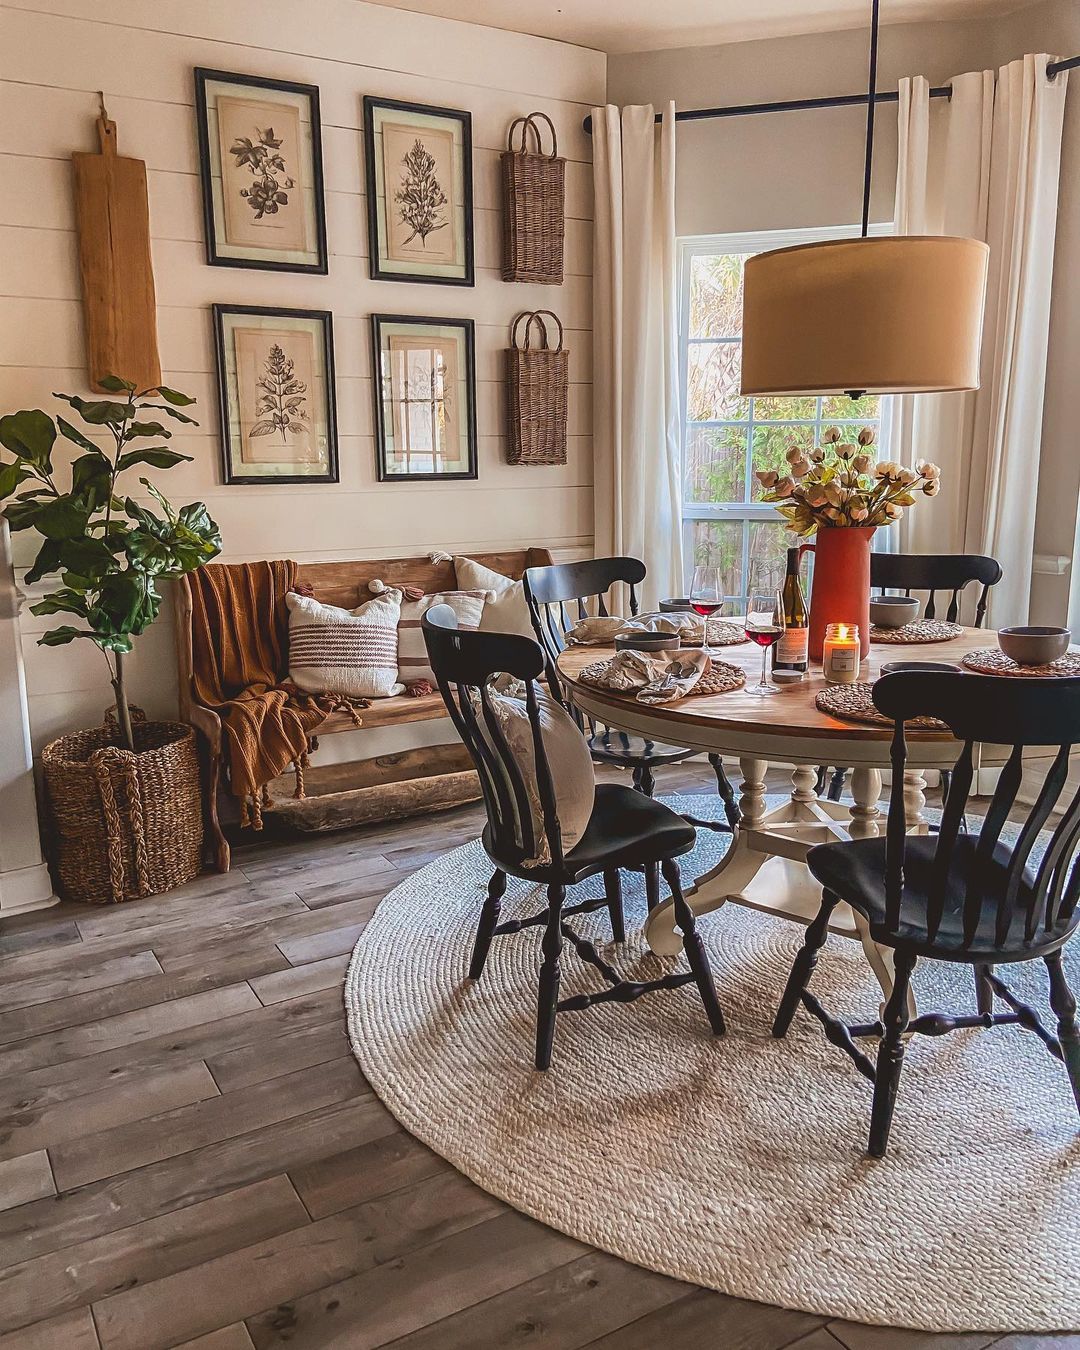 Cottagecore Inspired Dining Room. Photo by Instagram user @lifebyleanna